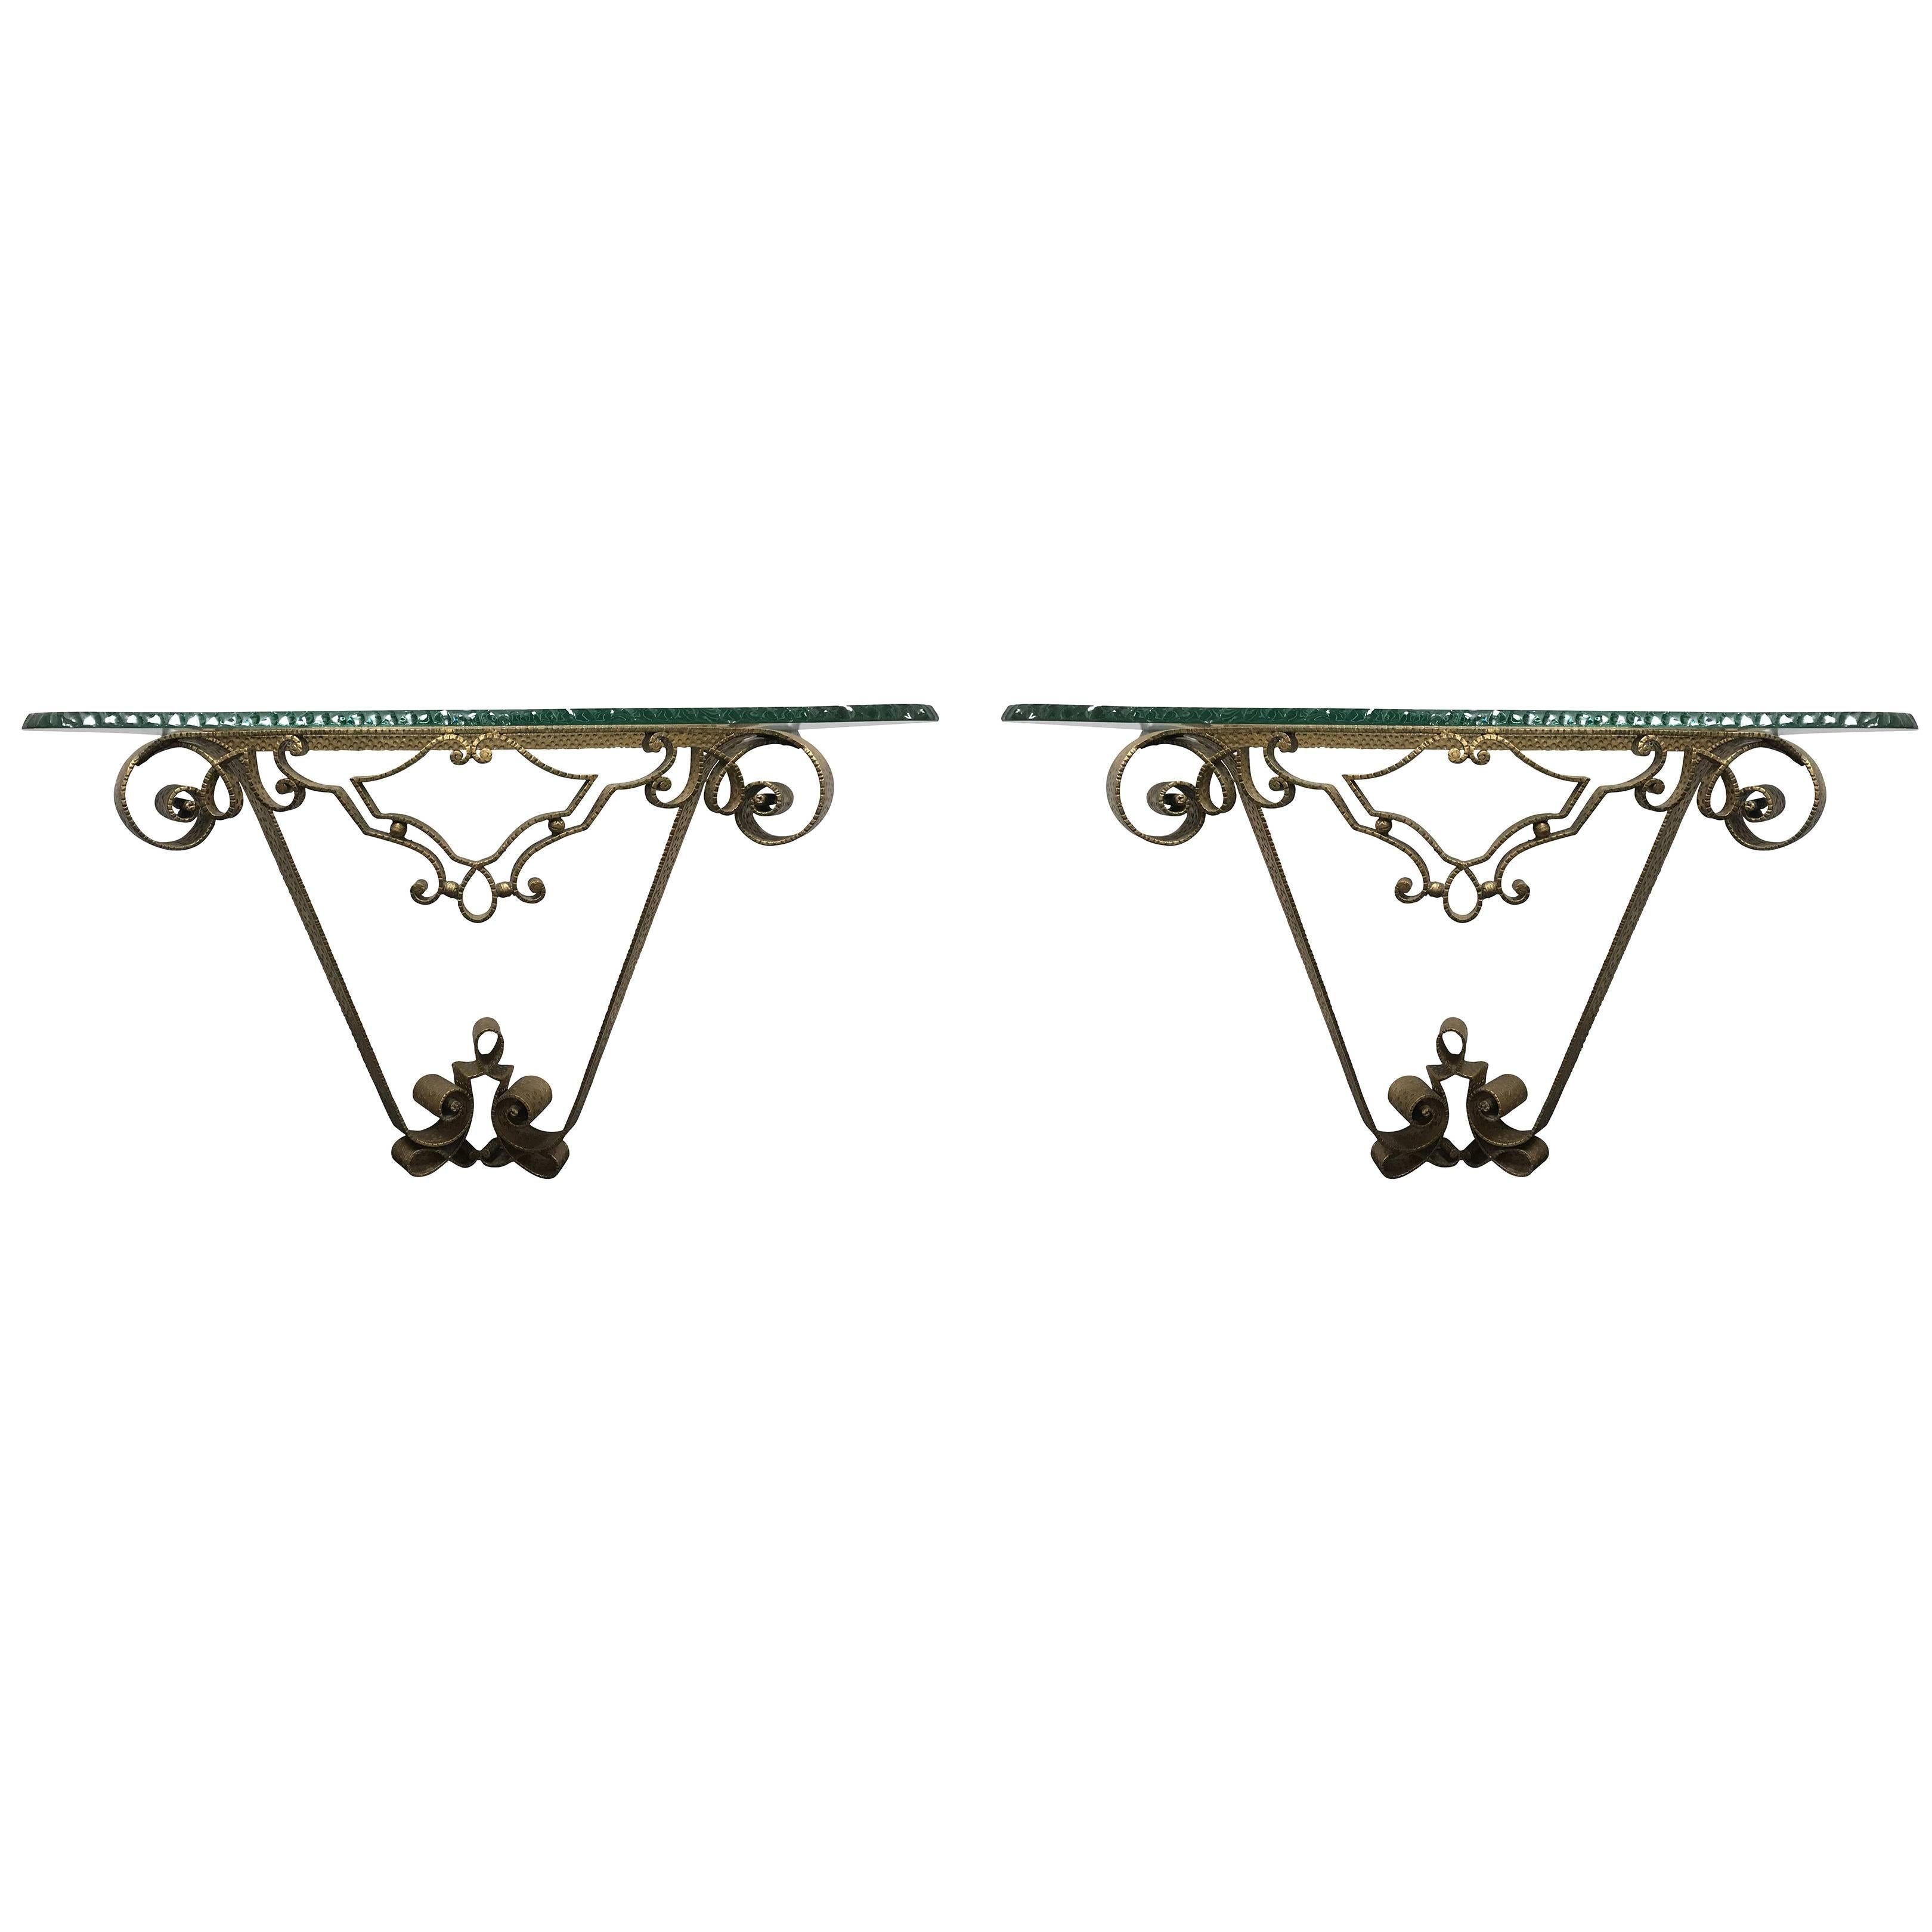 Luigi Colli Pair of Hammered Bronze Console Tables, Italy, 1950s